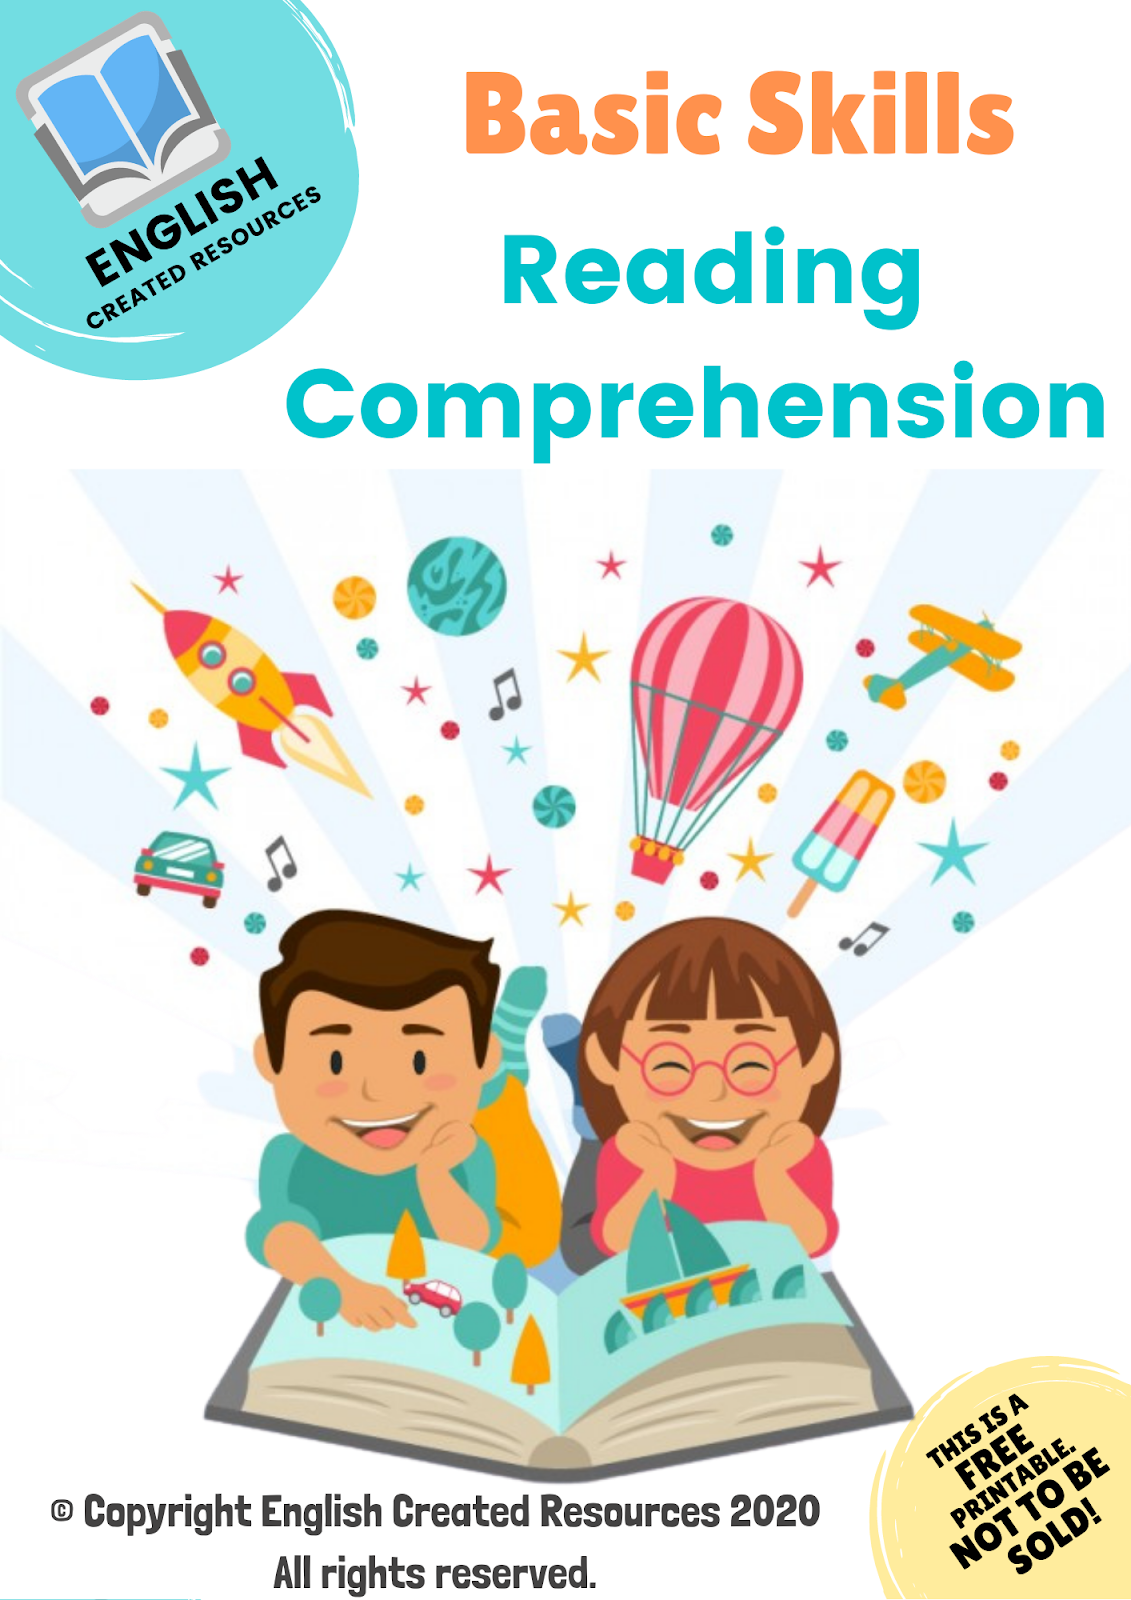 Basic Skills Reading Comprehension Worksheets - English Created Resources